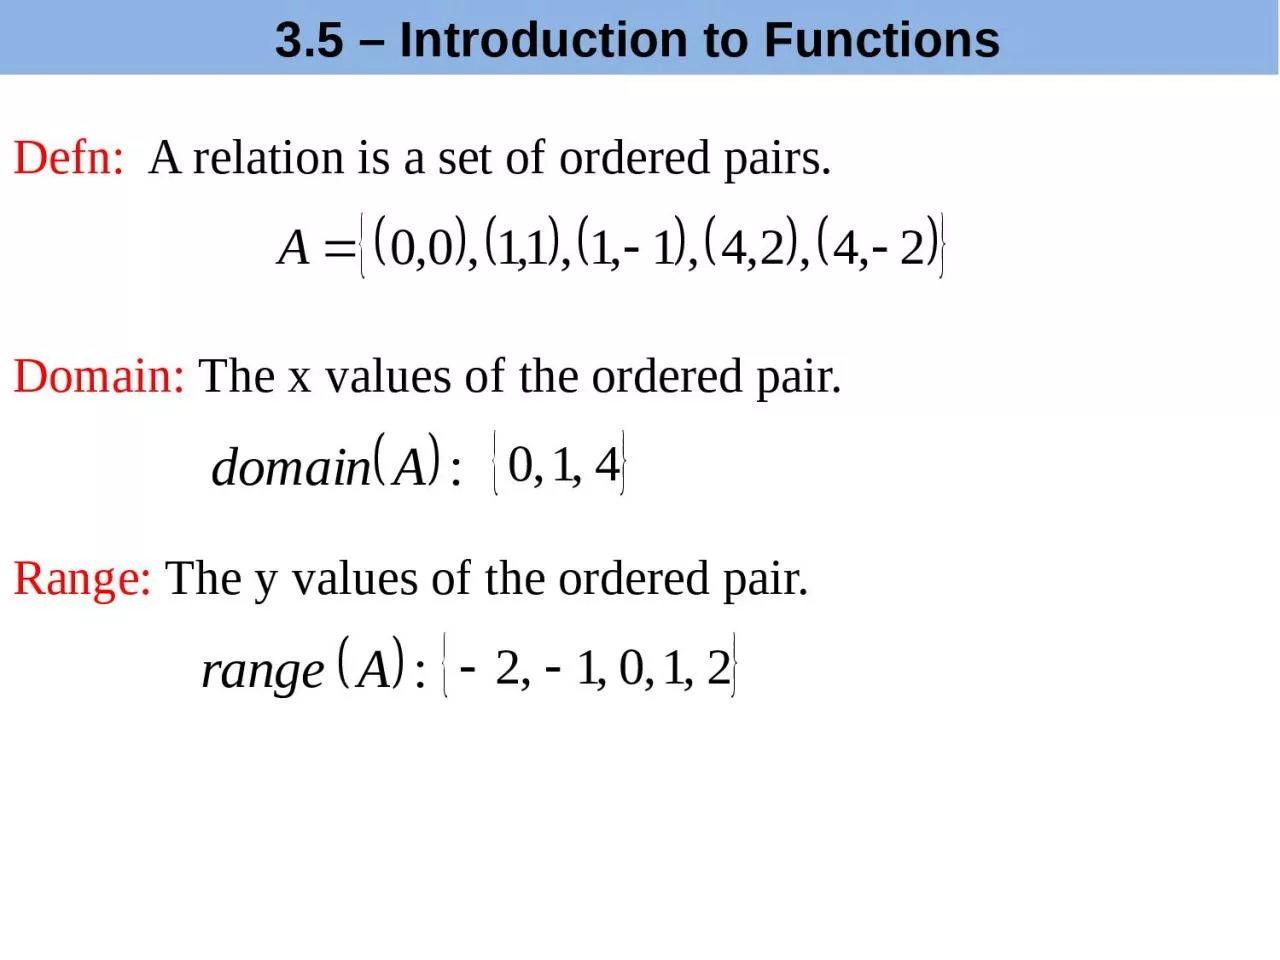 Defn:   A relation is a set of ordered pairs.